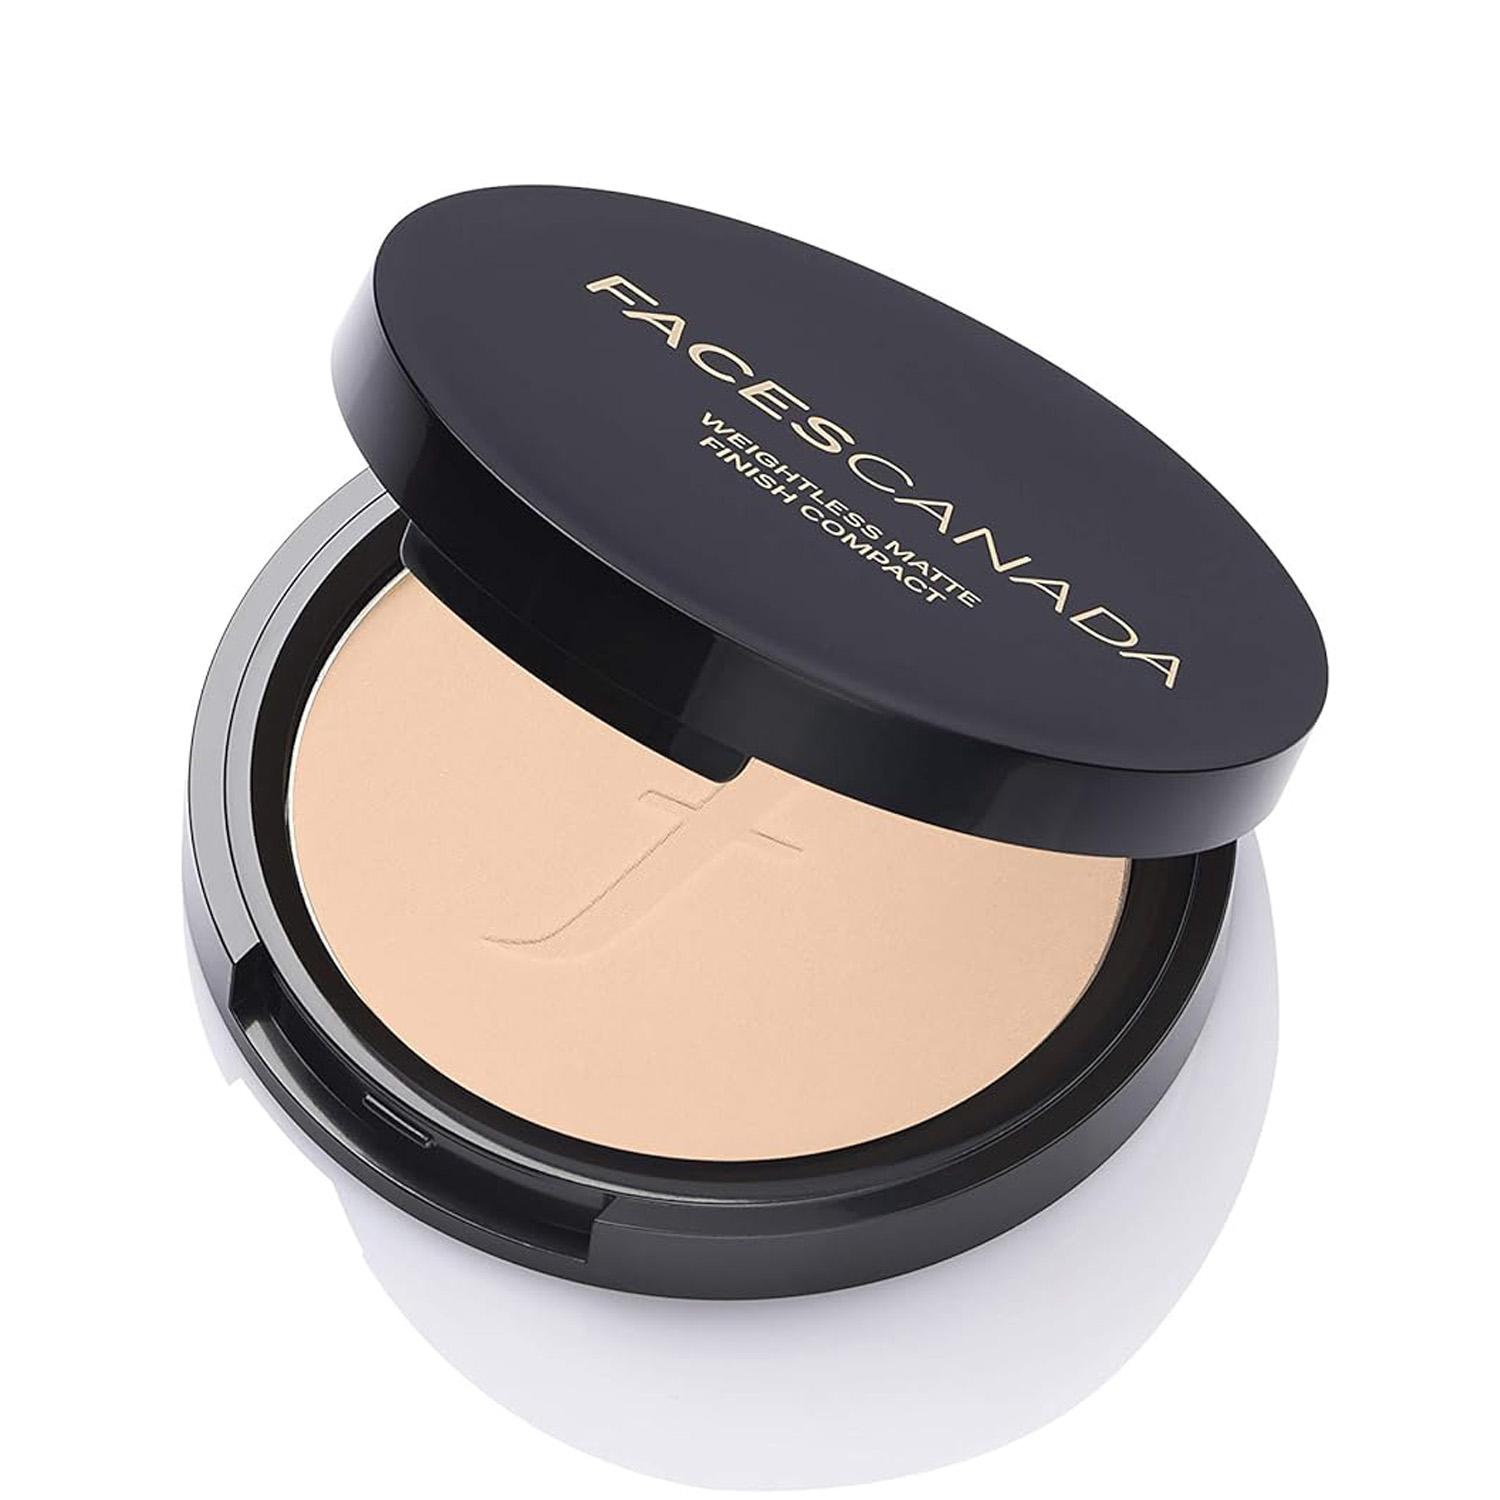 Faces Canada | Faces Canada Weightless Matte Finish Compact Powder - Ivory, Non Oily Matte Pressed Powder (9 g)